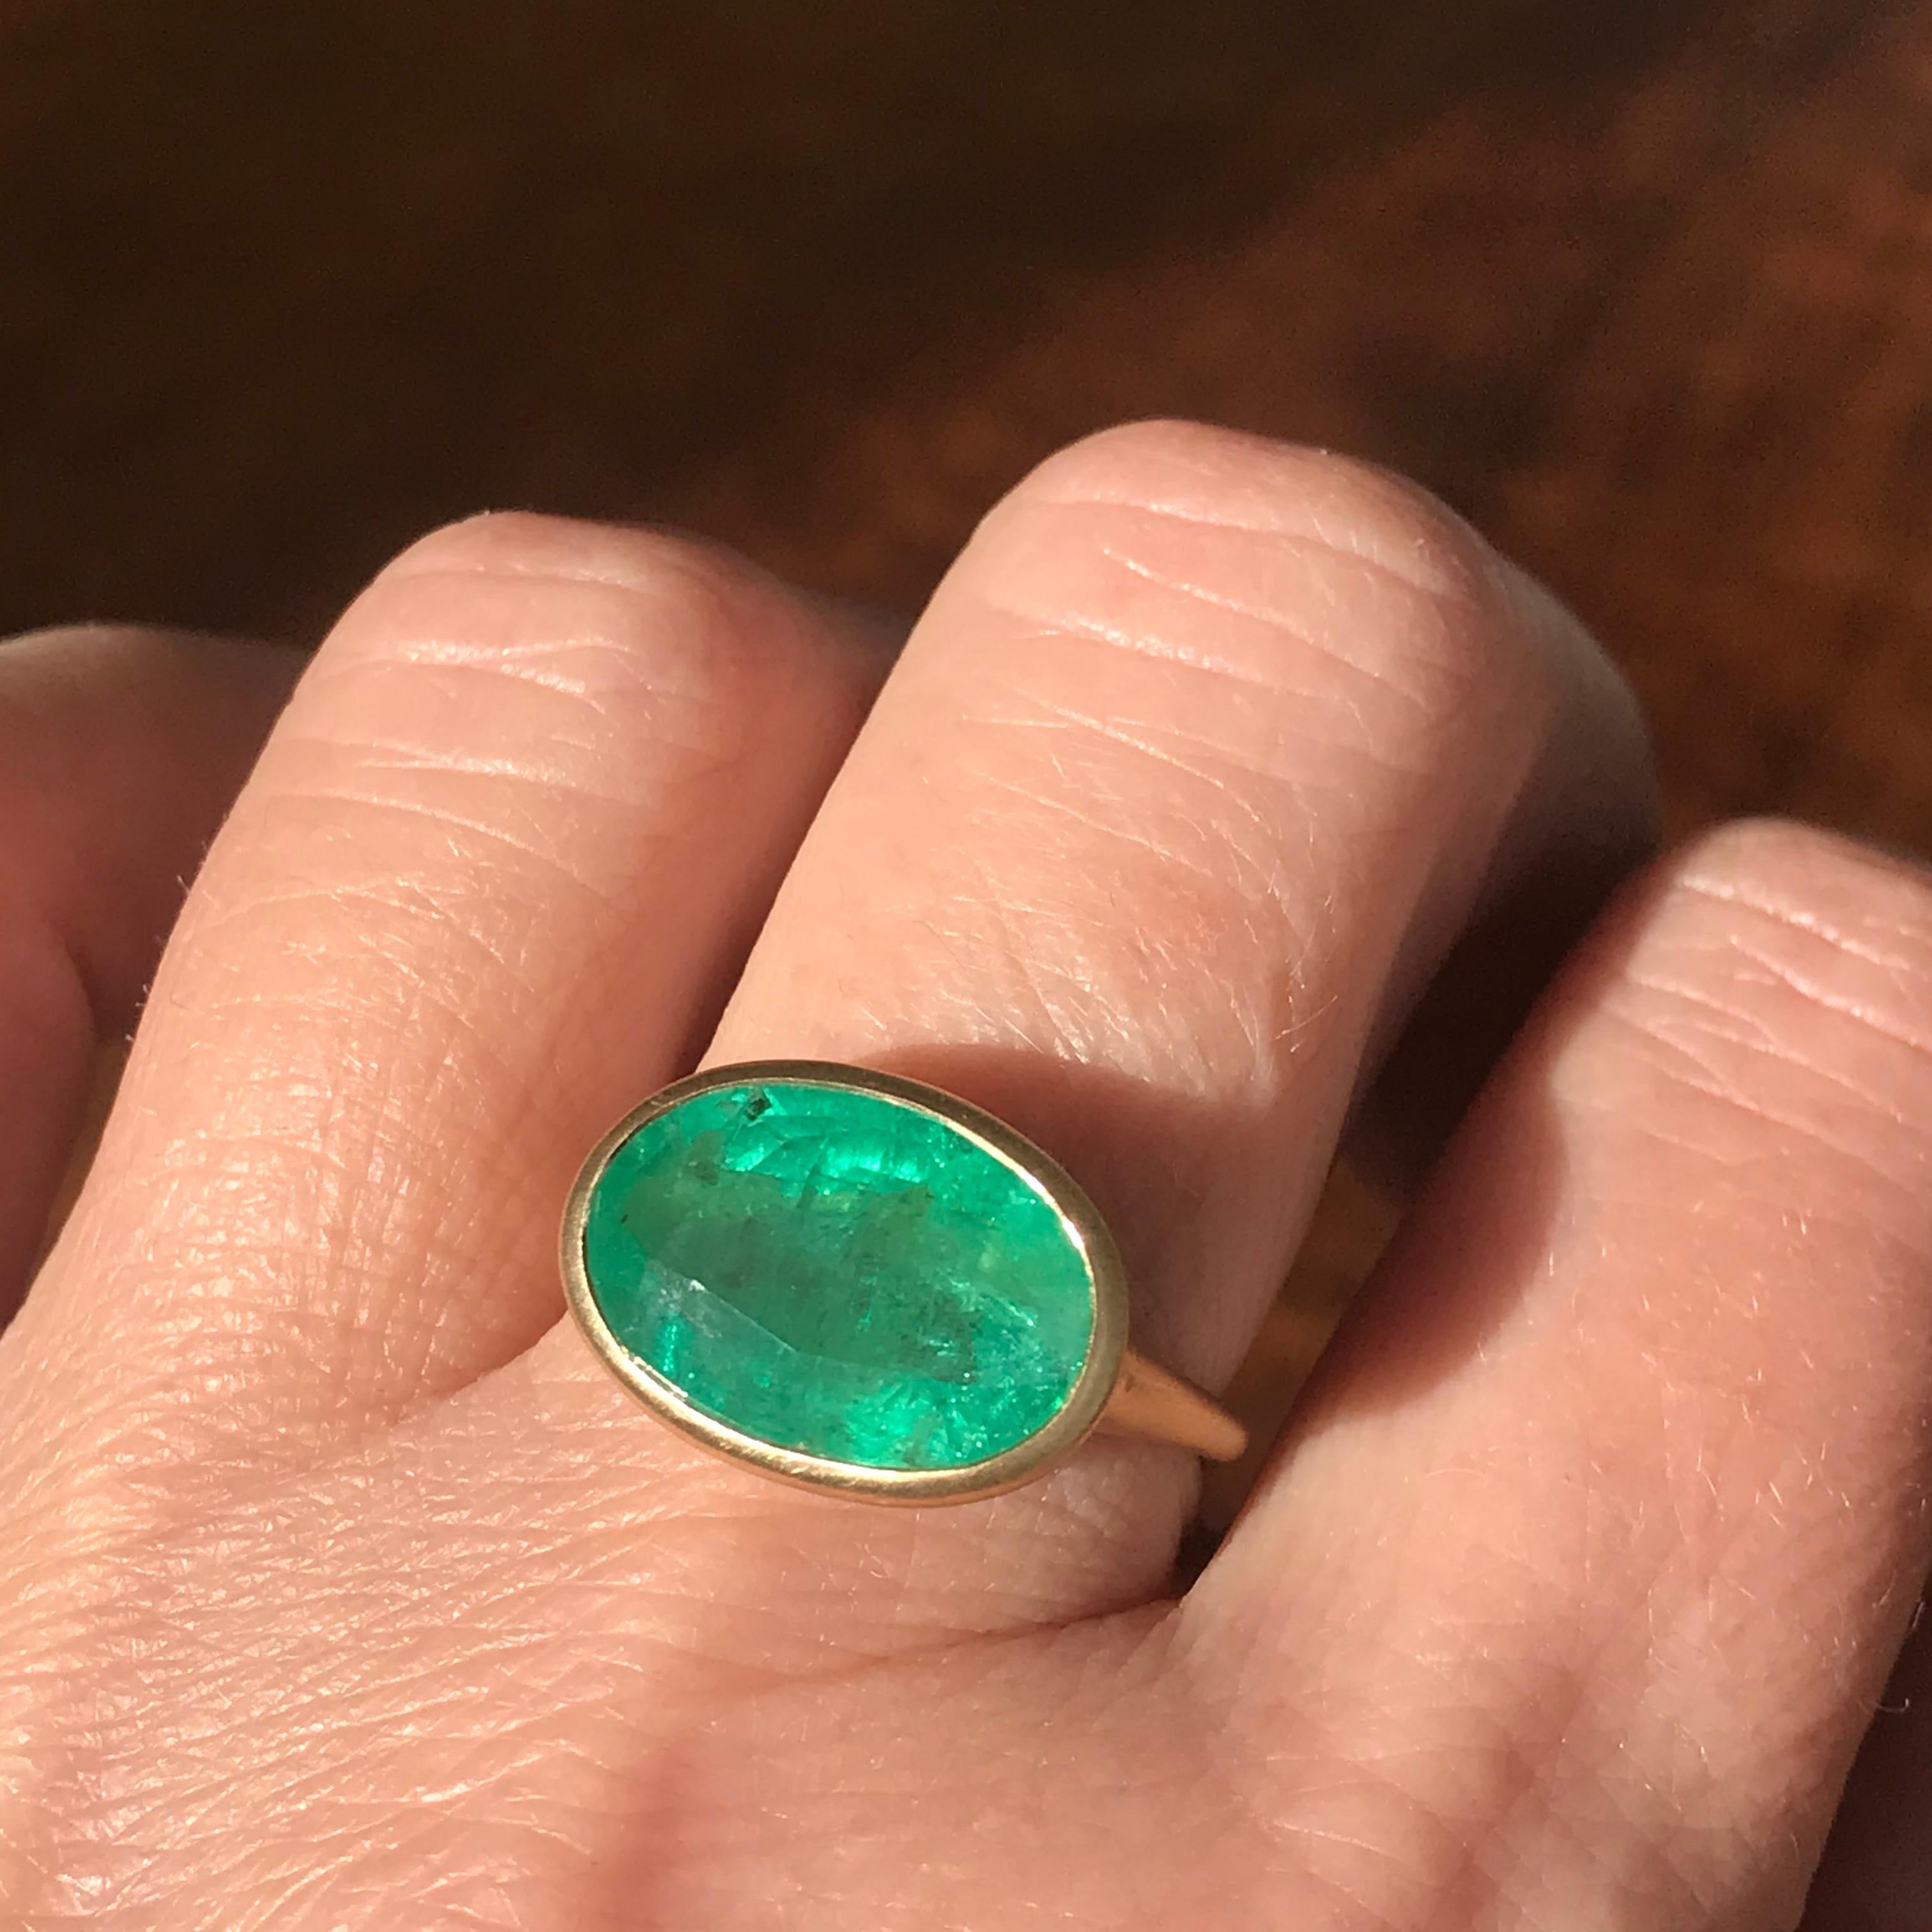 Dalben design One of a Kind 18k yellow gold matte finishing ring with a 5,5 carat bezel-set oval cut emerald. 
Ring size 7 1/4 USA - EU 55 re-sizable to some finger sizes. 
The emerald have natural inclusions that are often called the jardin (French